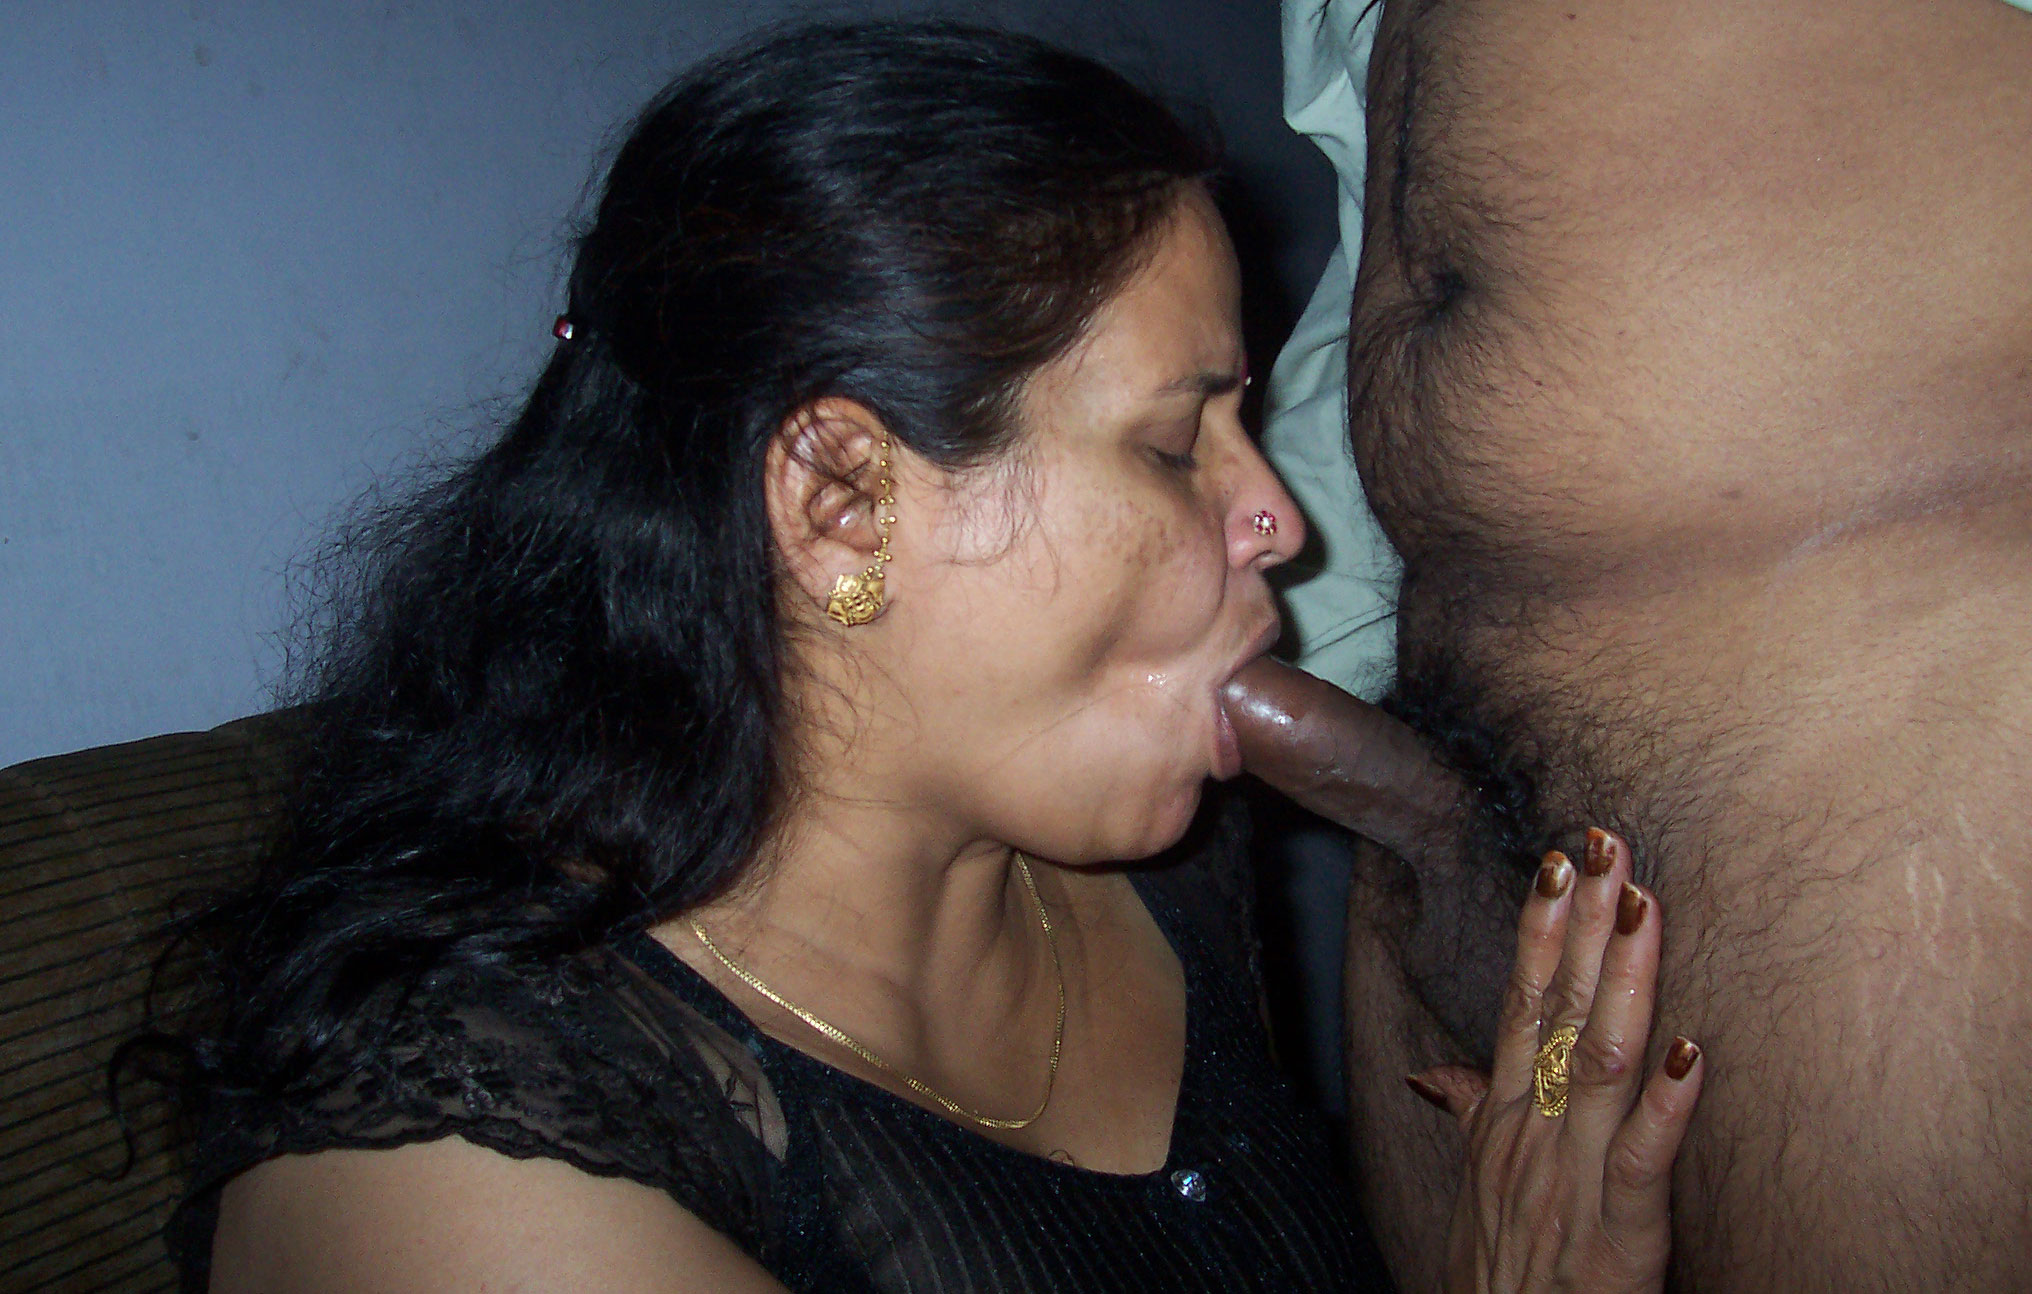 Indian 3some sex